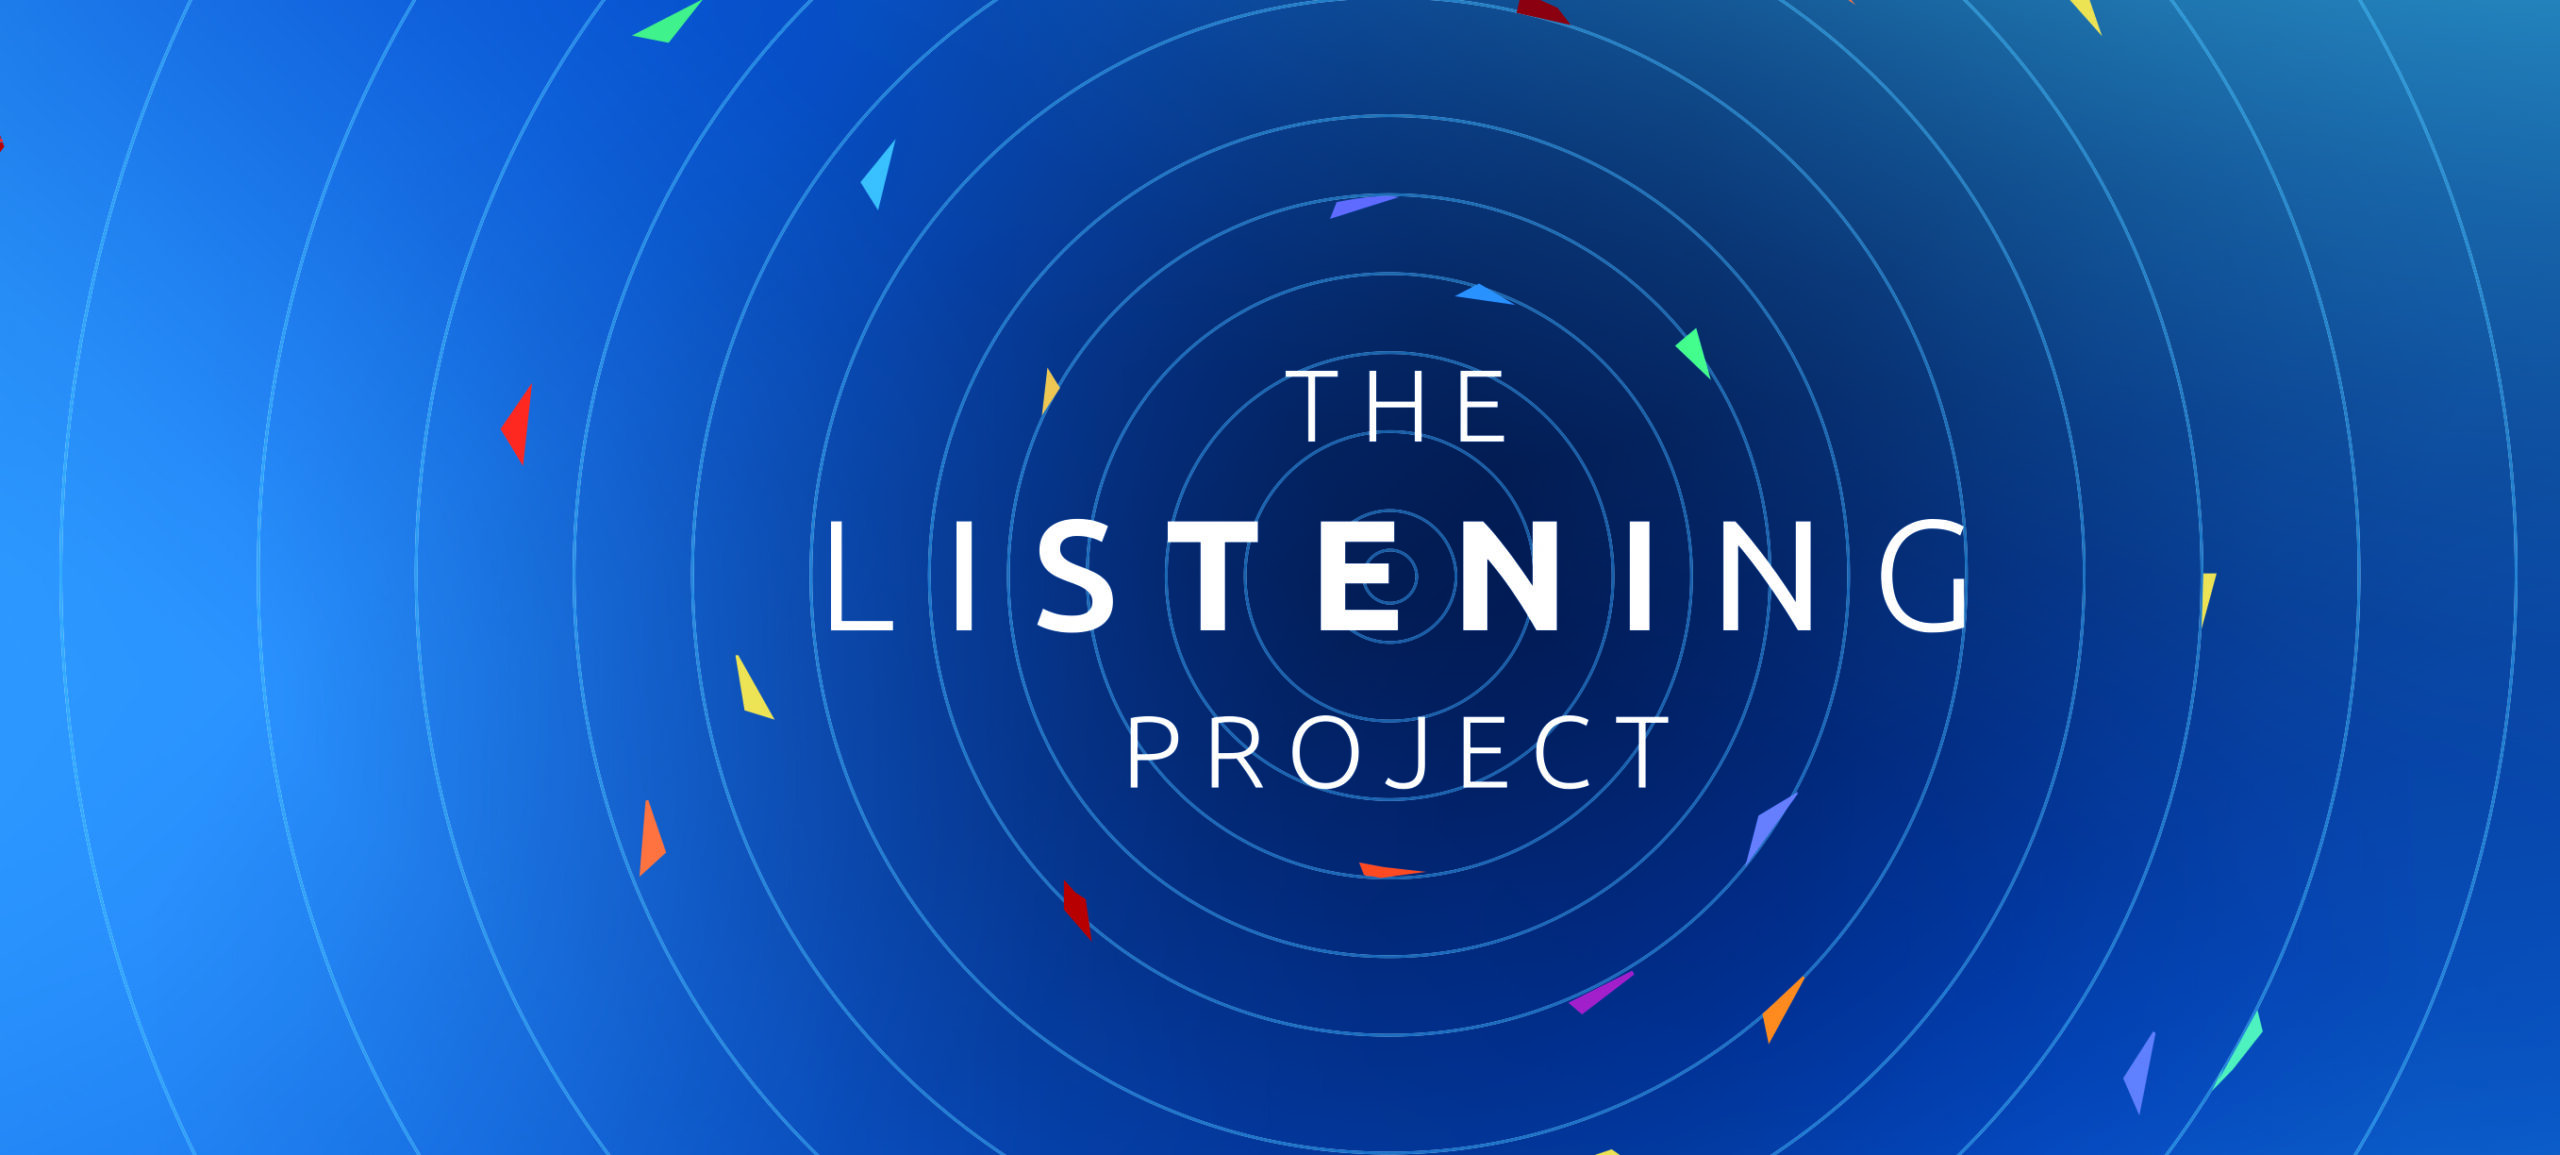 Concentric circles around the text "The Listening Project"